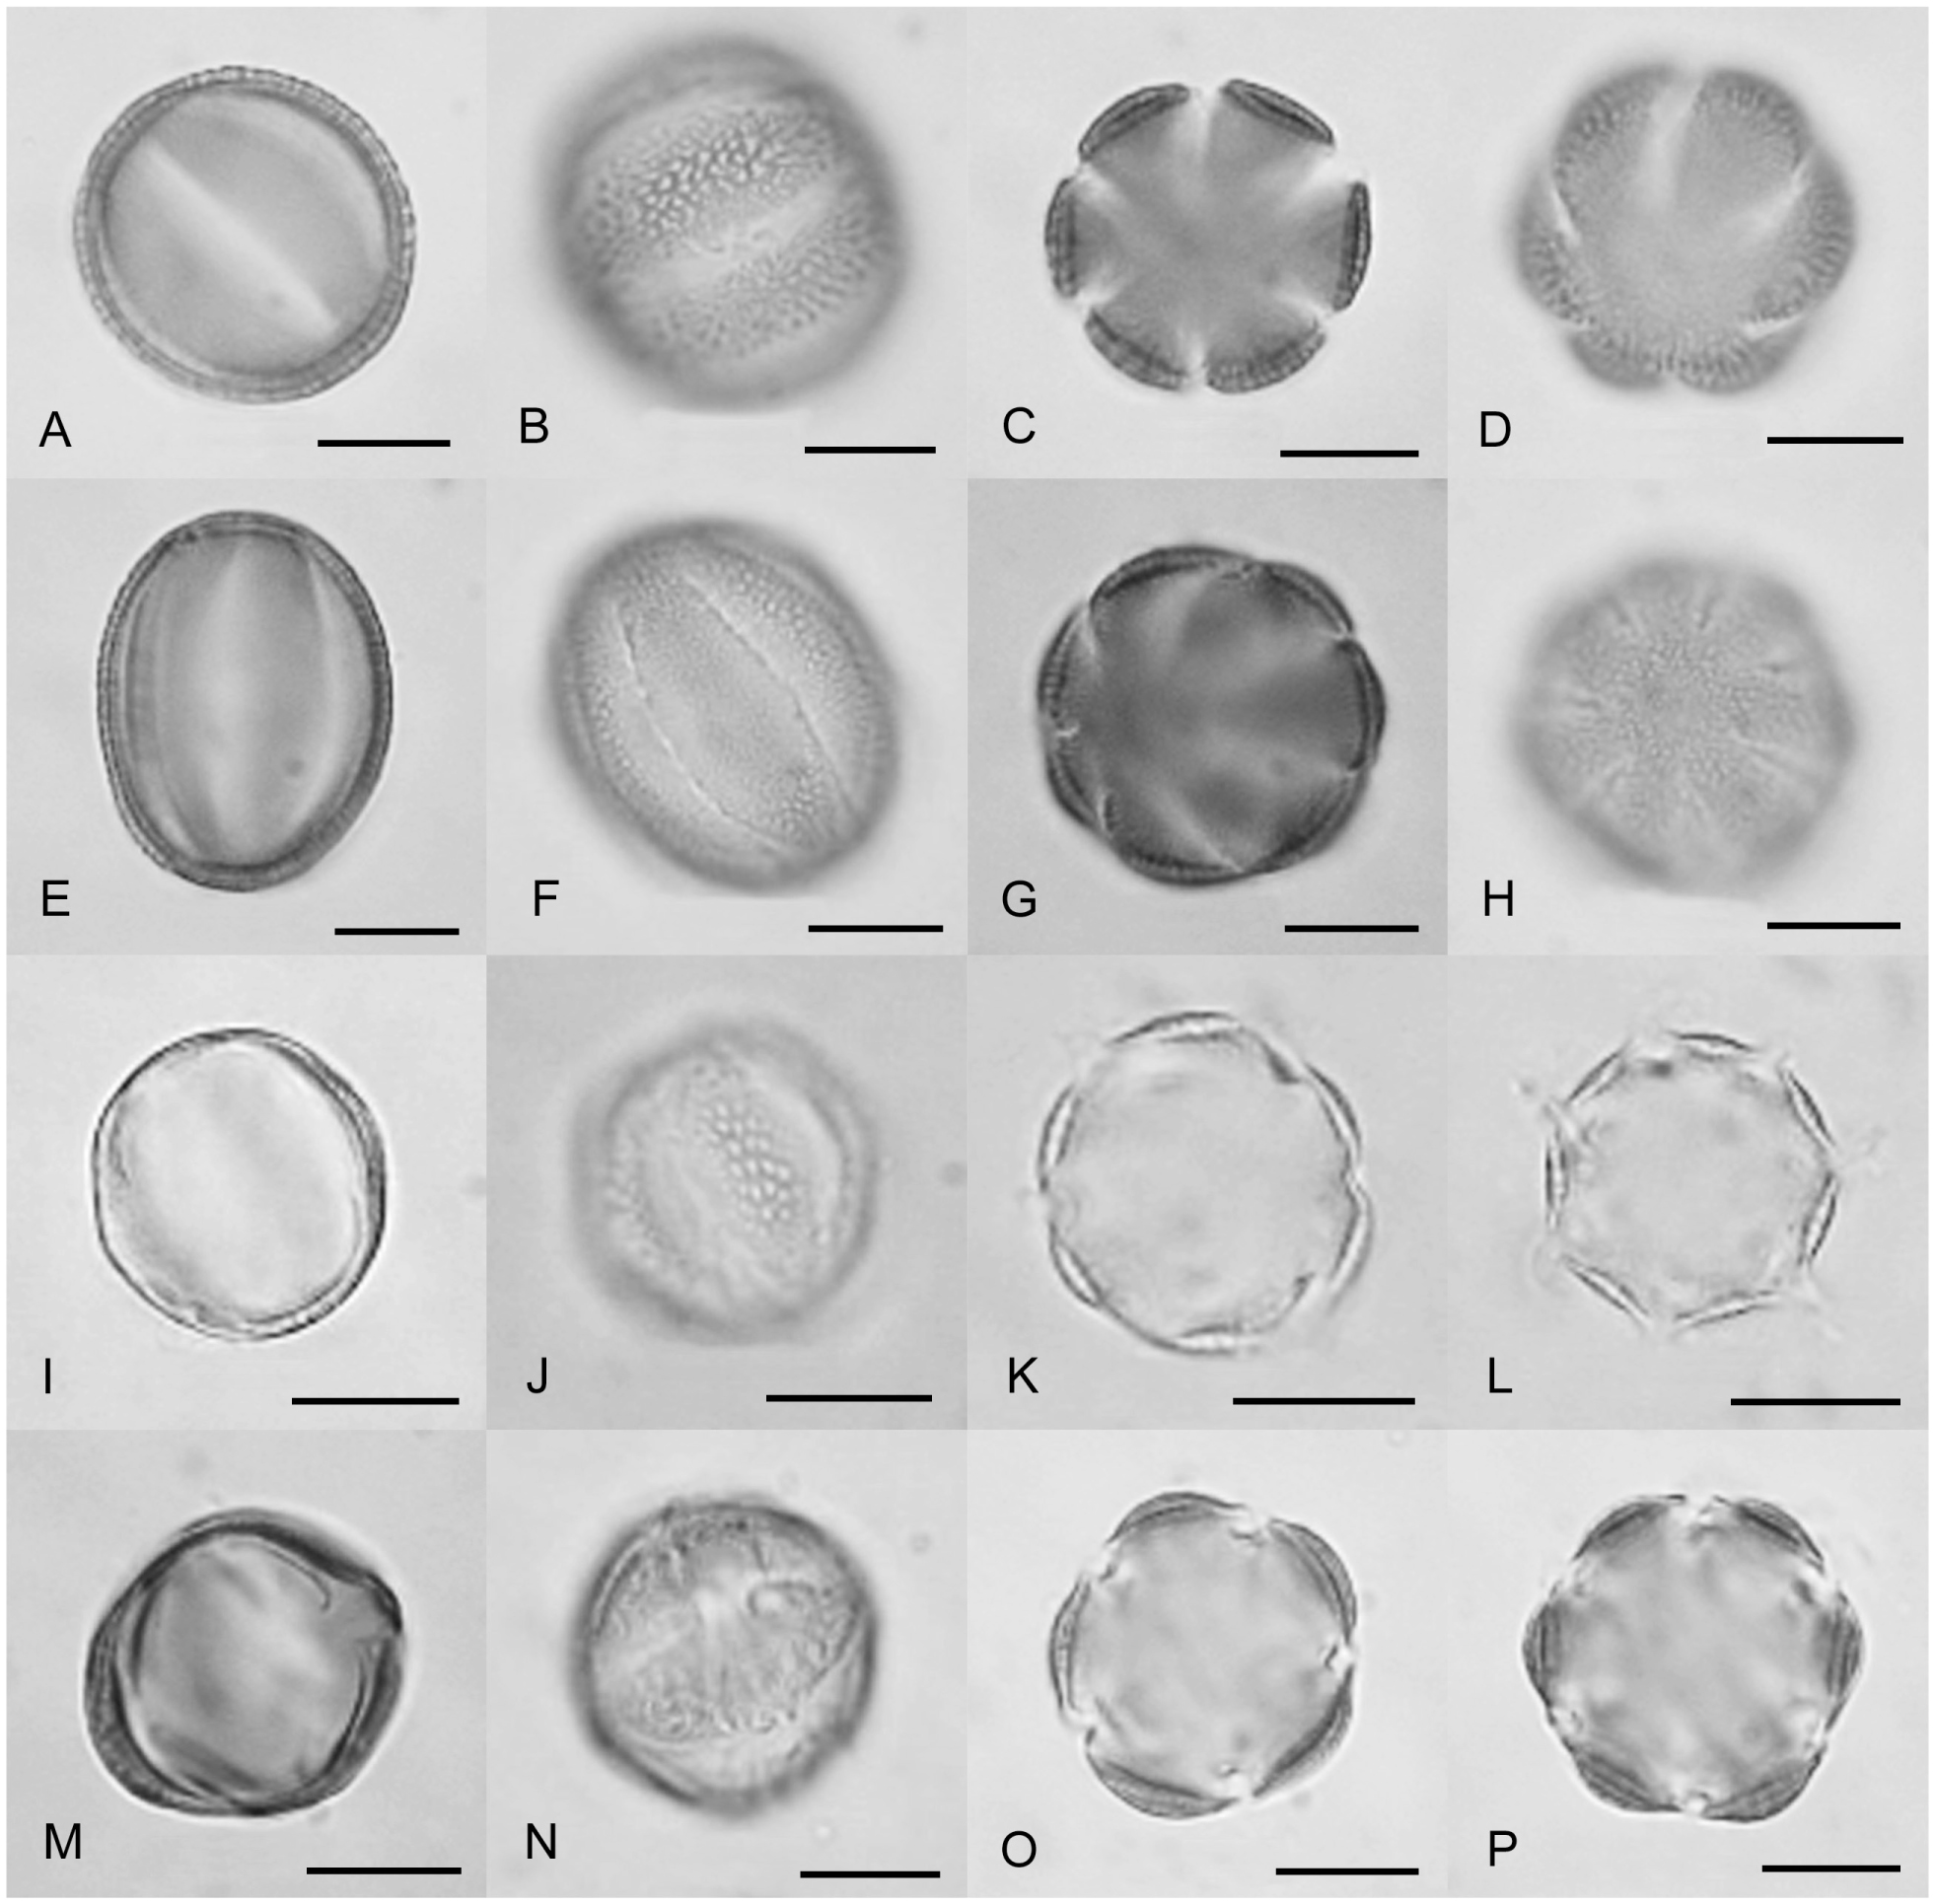 Pollen Morphology Of The Tribe Hemimerideae Possible Evidence Of Ancestral Pollen Types And Parallel Evolution In The Basalmost Clade Of Scrophulariaceae S Str